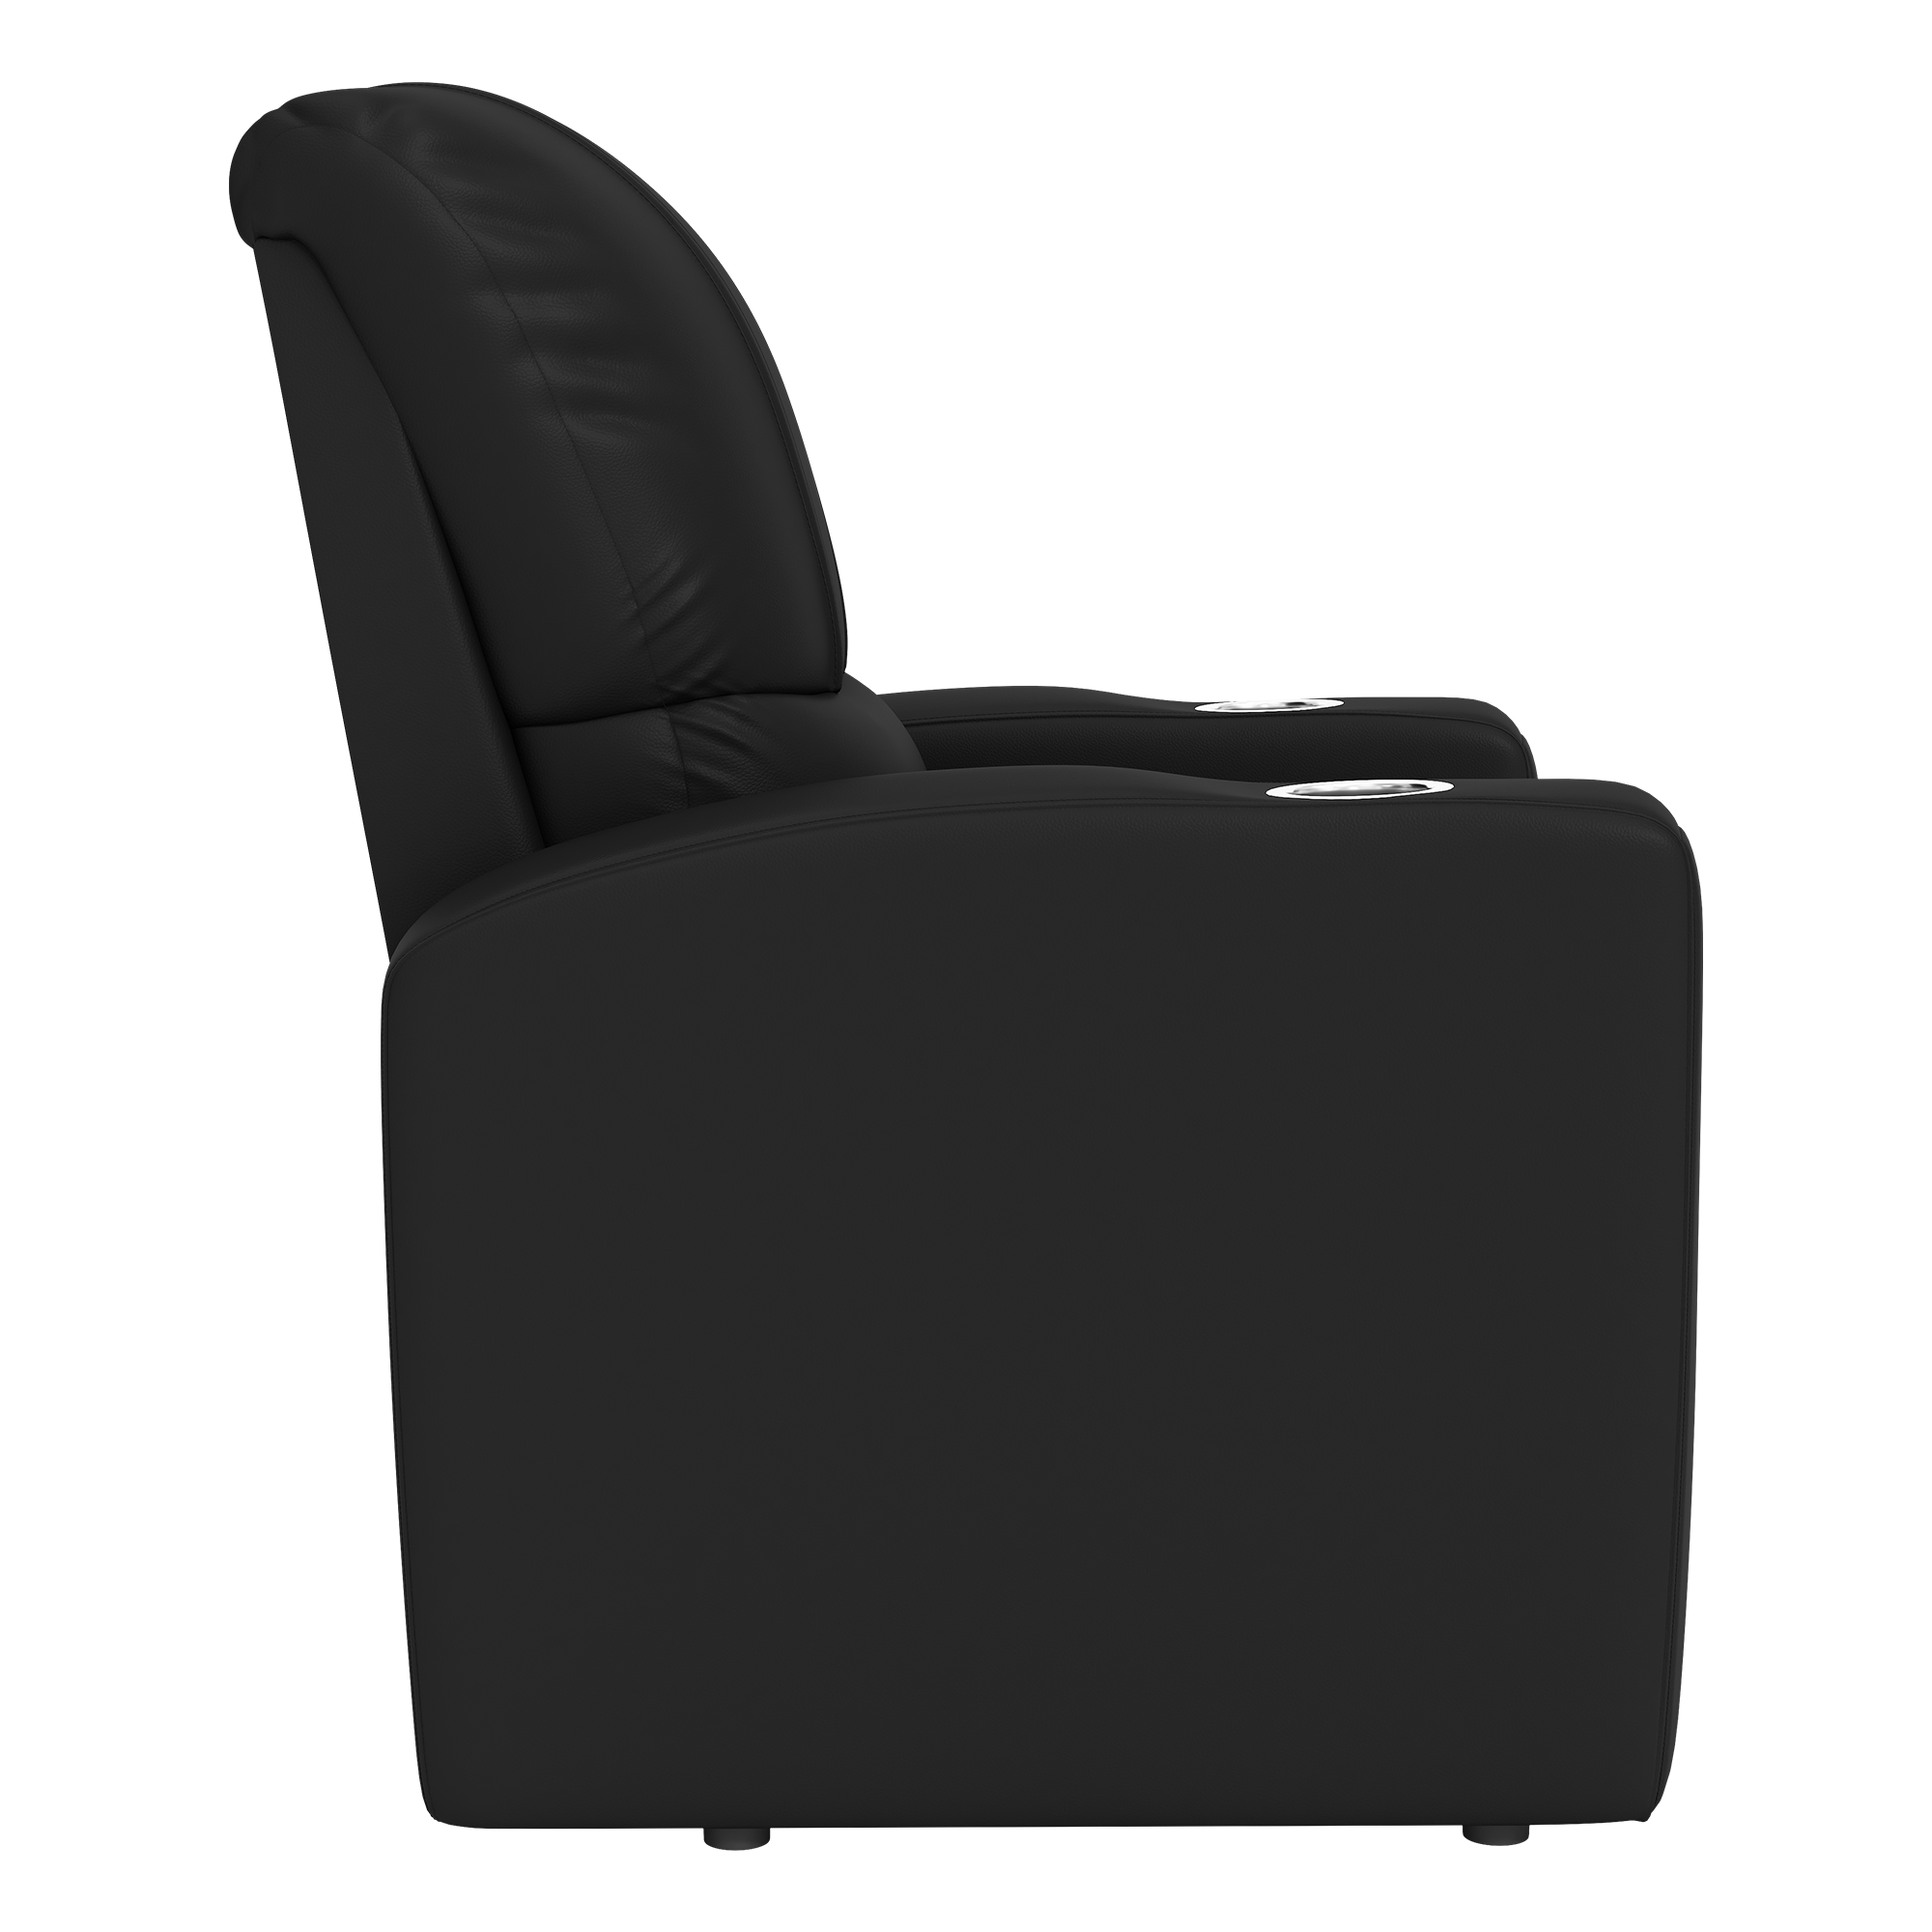 Stealth Recliner with Chicago Cubs Cooperstown Primary